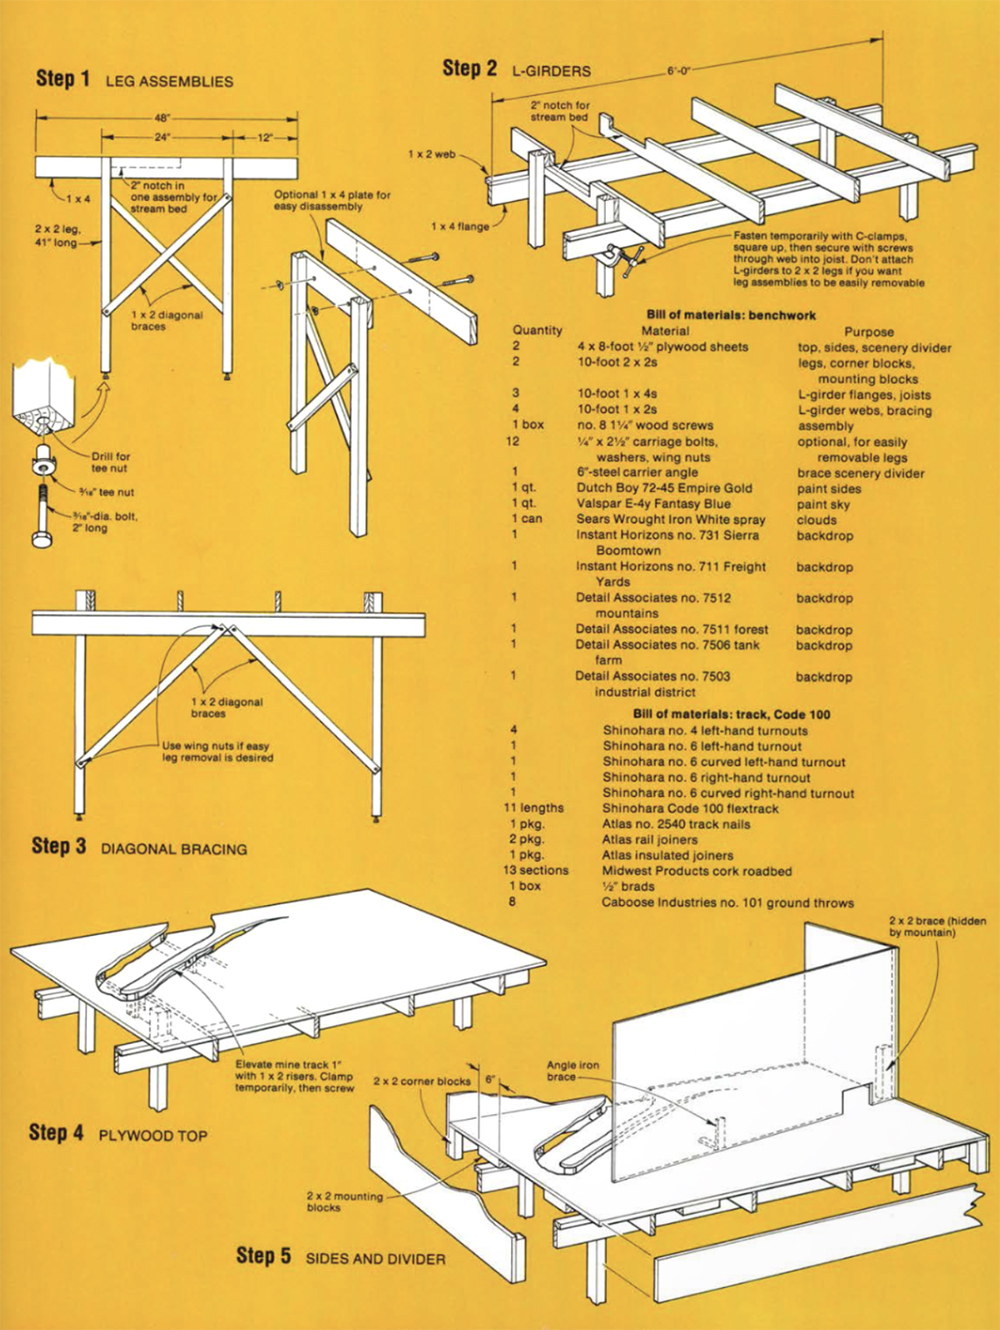 Gold, white, and black illustration showing how to assemble a small table with legs to support a model railroad